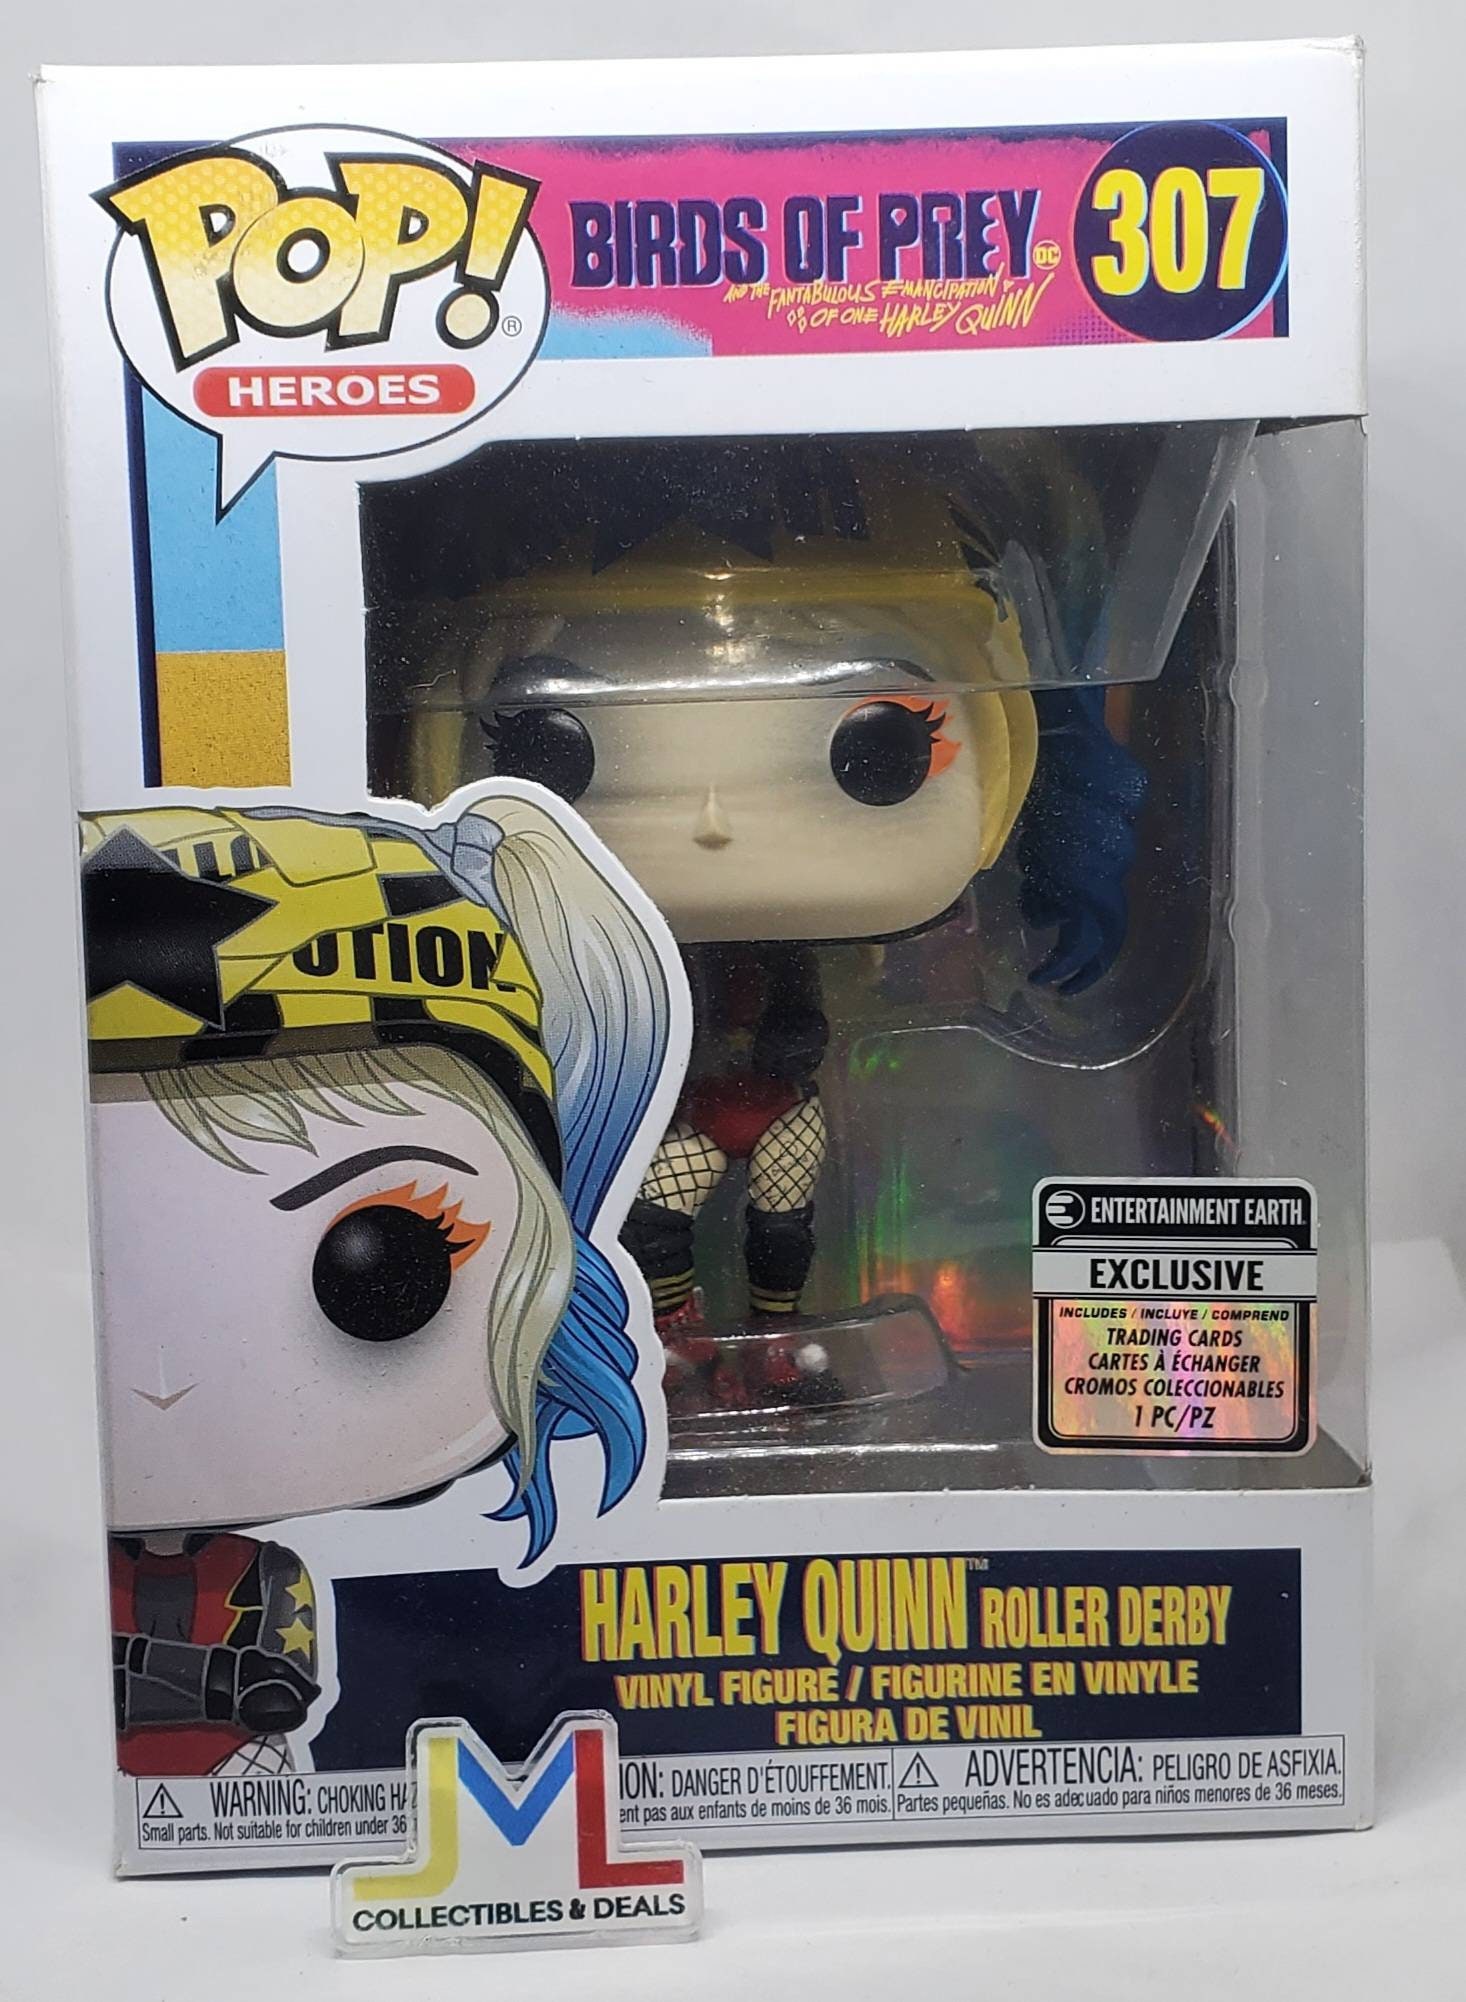 Funko Collector Cards from Birds of Prey Are Now Available for Order